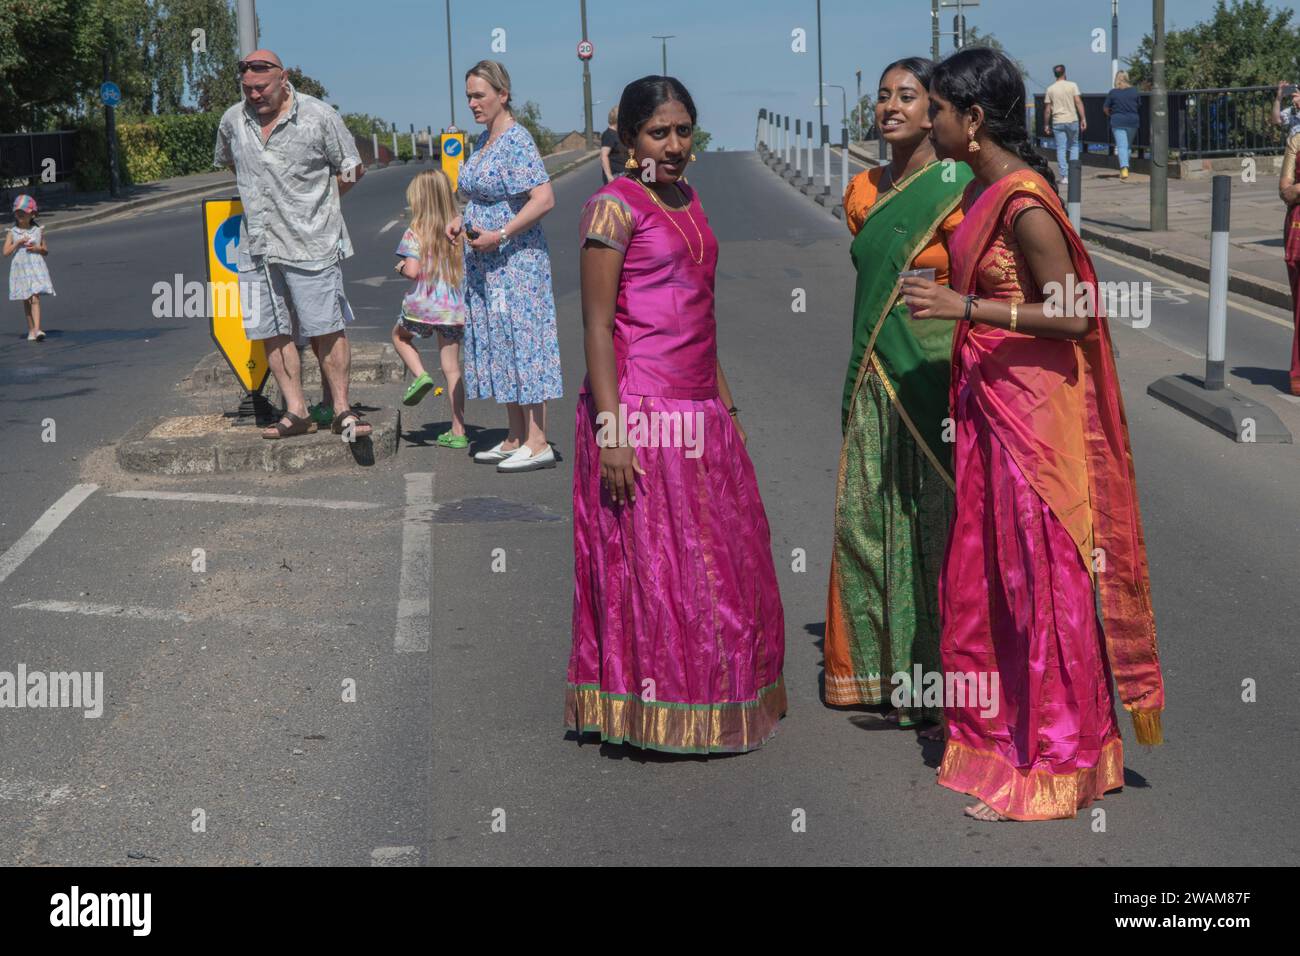 Immigration into Britain, British multicultural society, group young Hindu Tamil women attend a traditional Hindu annual festival in suburban Wimbledon. Local English residents watch the procession too. London England 2022 2000s HOMER SYKES Stock Photo